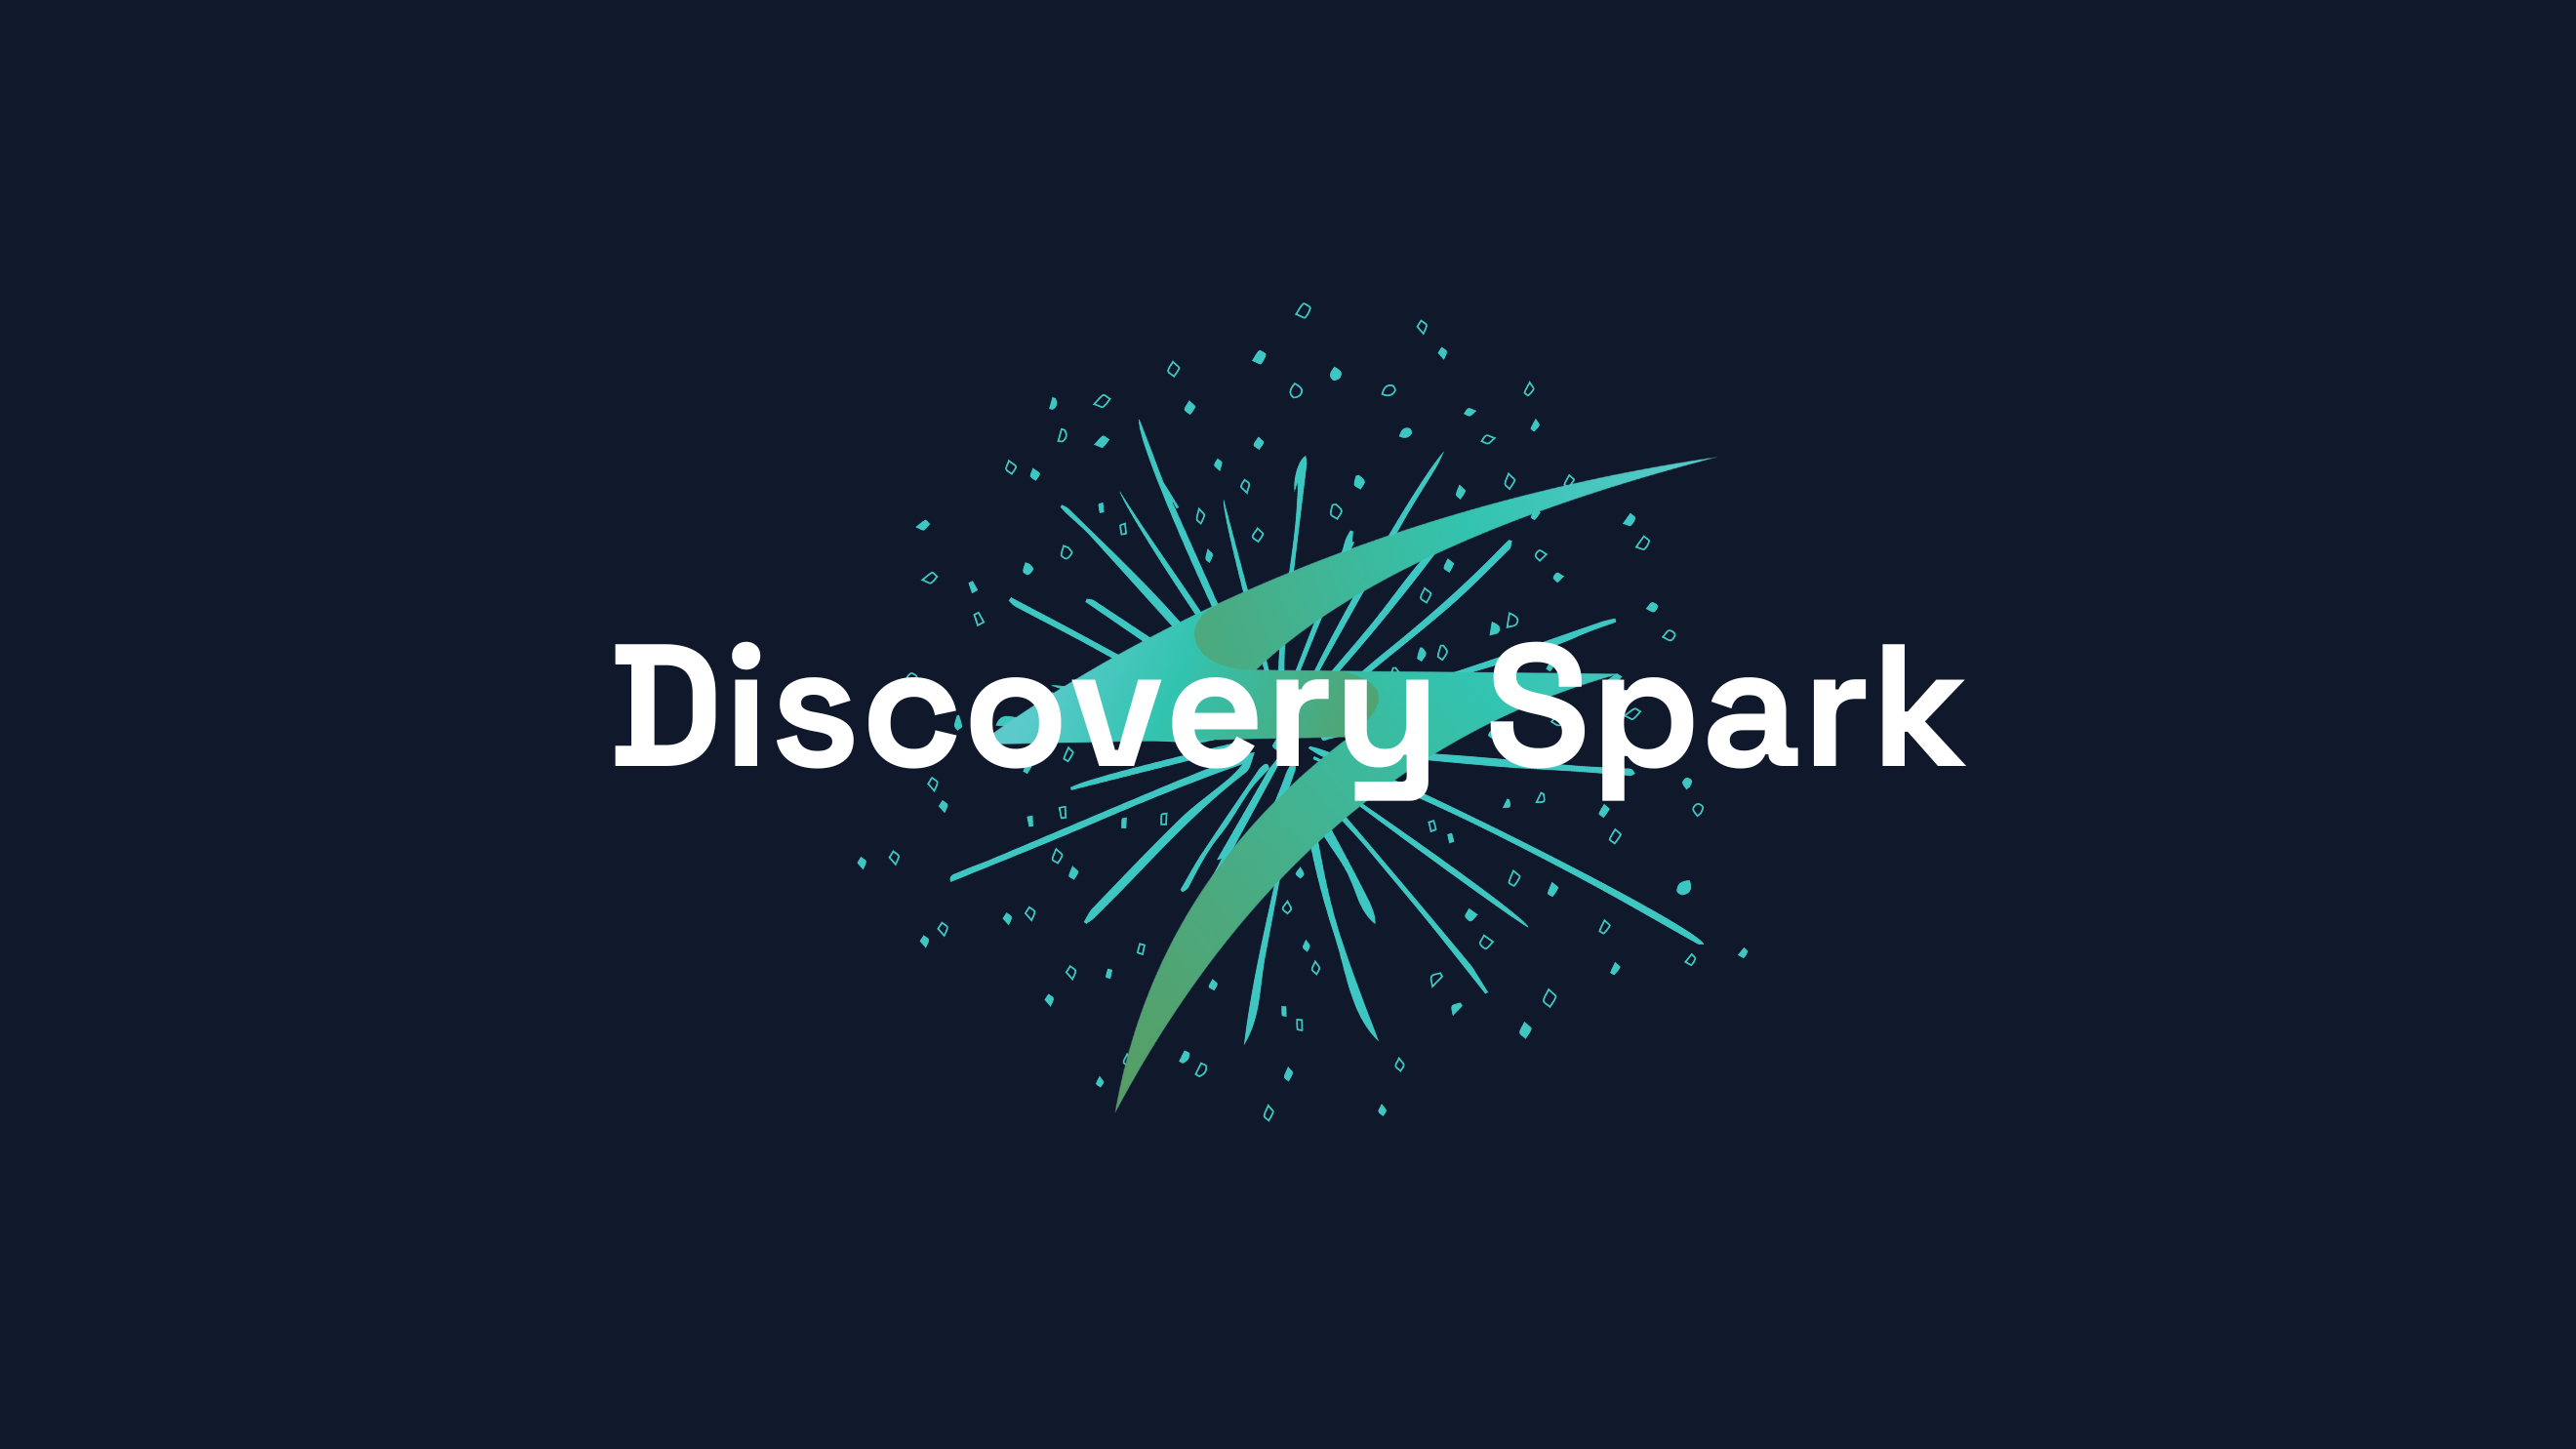 New Business Support Programme and Competition for Life Science Start-Ups: Discovery Spark